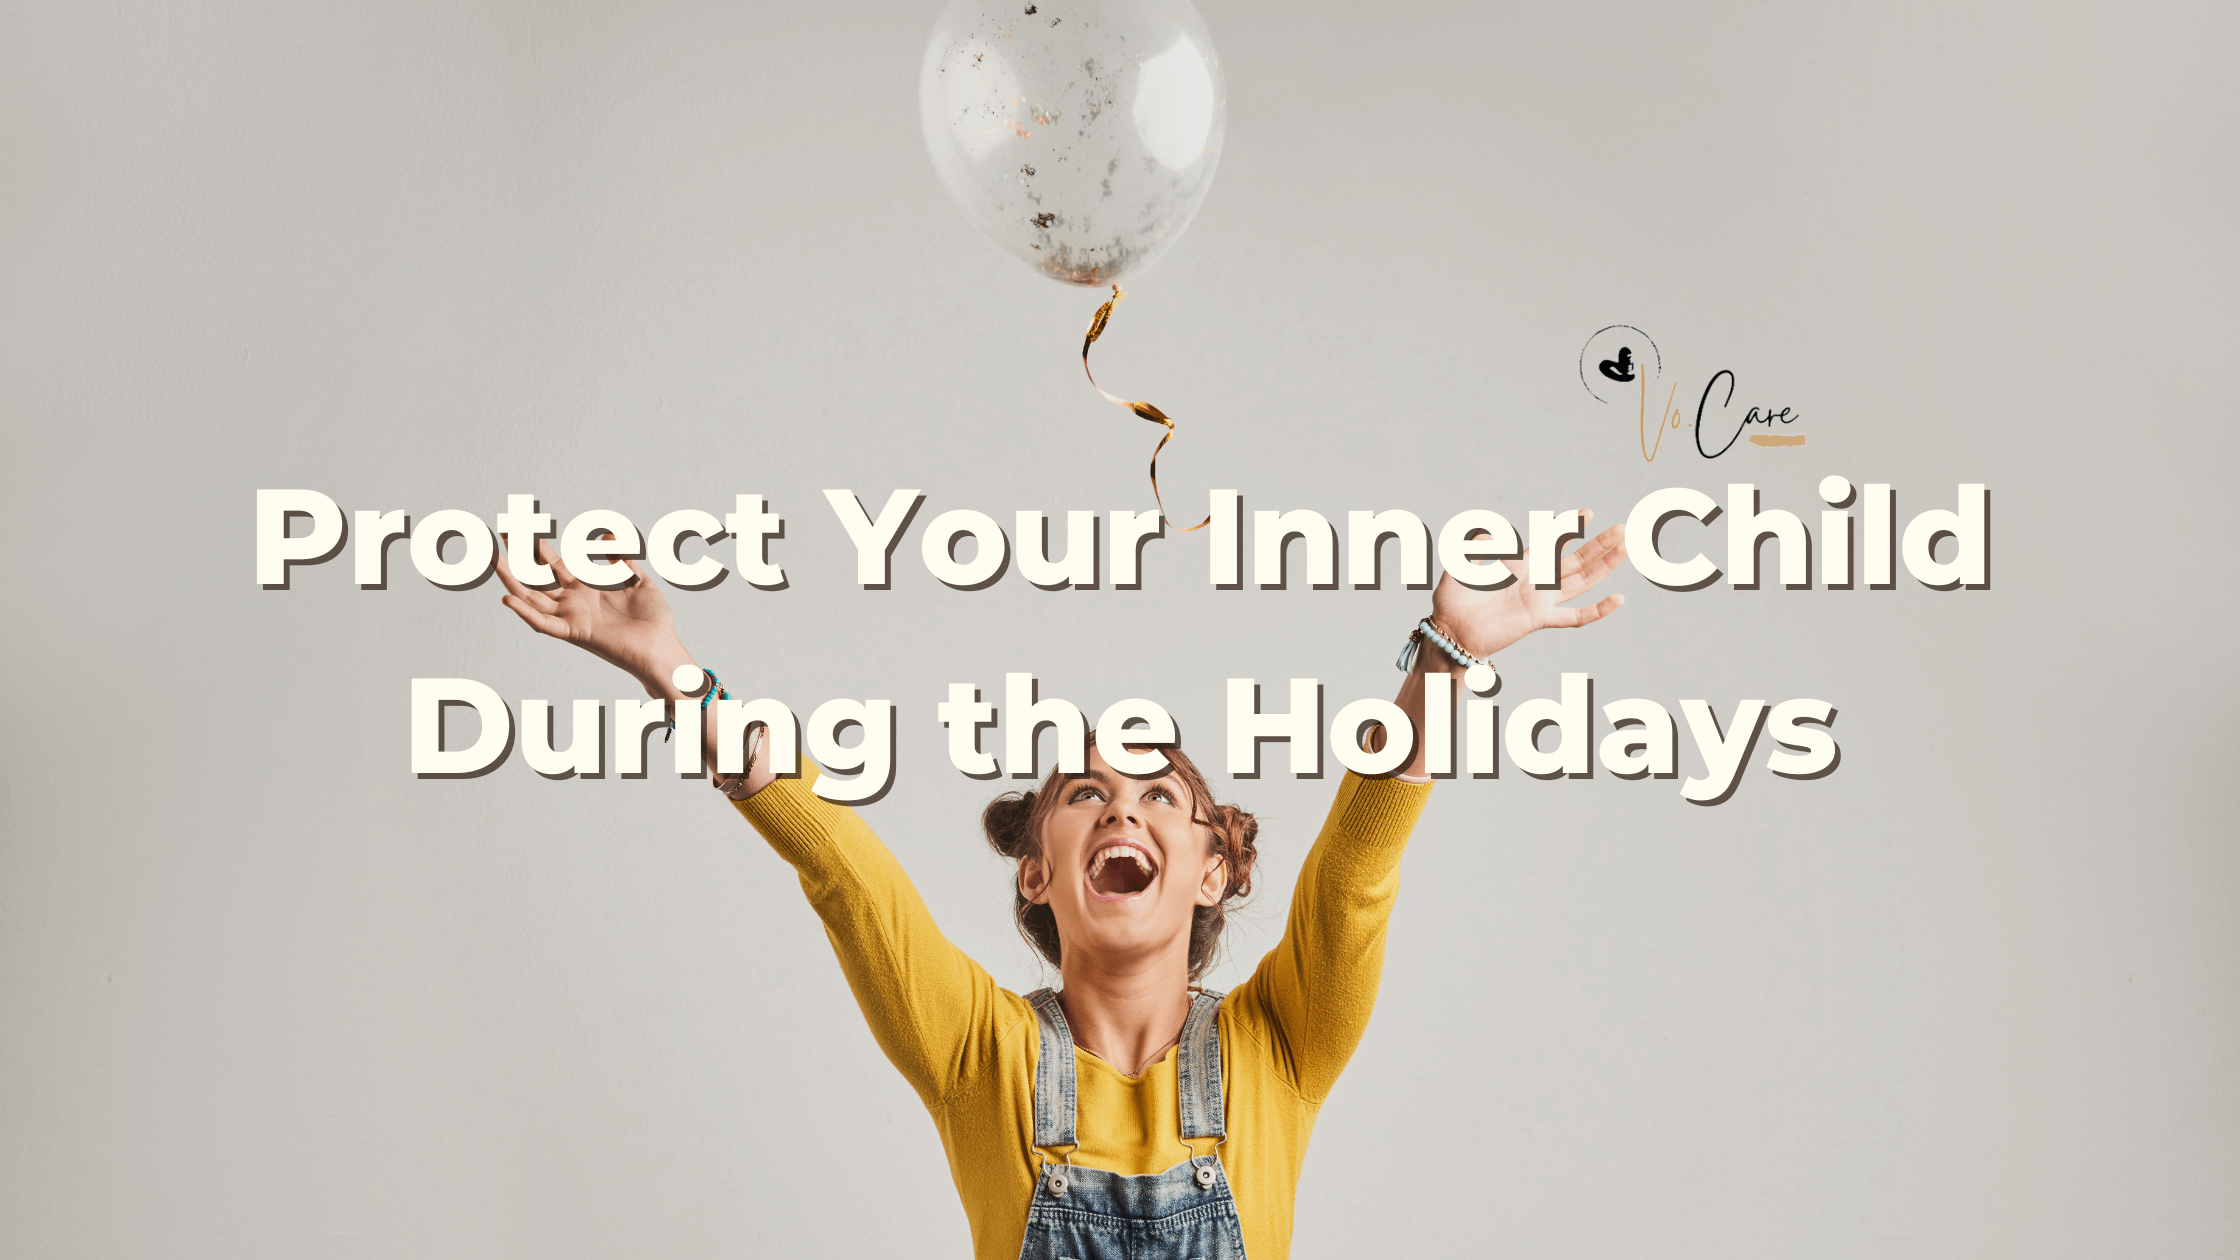 Protect Your Inner Child During the Holidays | Vo Care Psychiatry